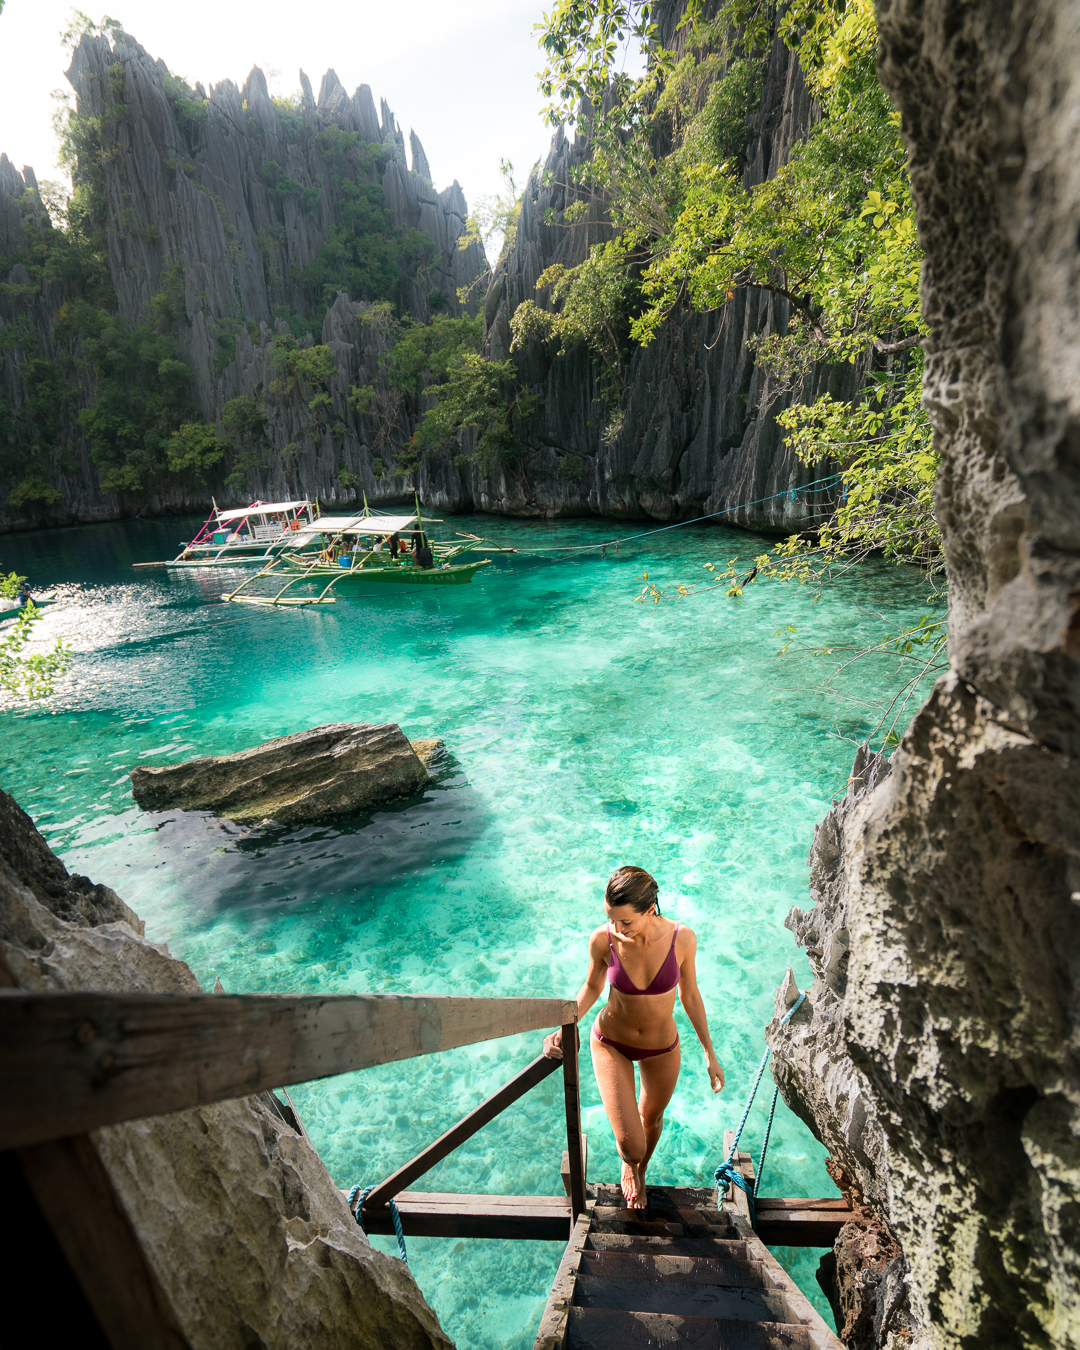 Walking on the staircase that separates the two bodies of water at Twin Lagoon in Coron, Philippines.